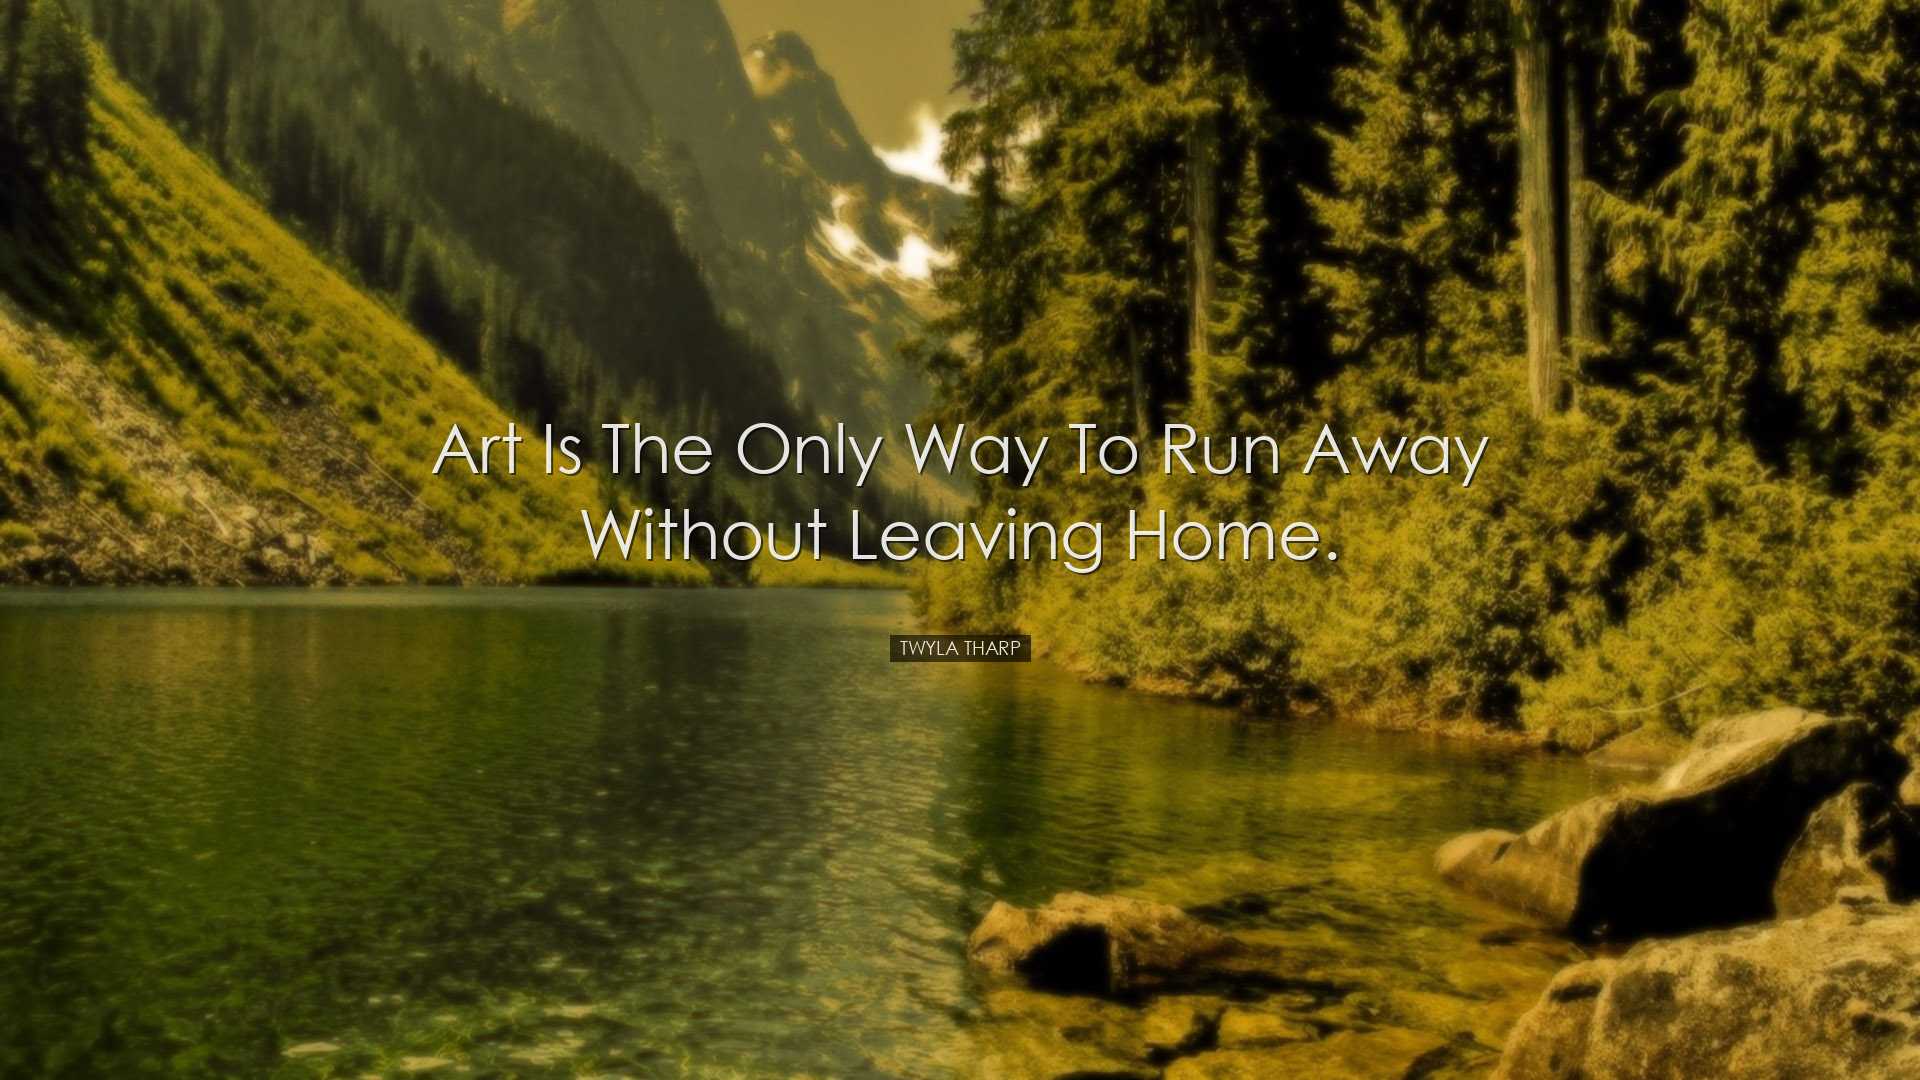 Art is the only way to run away without leaving home. - Twyla Thar